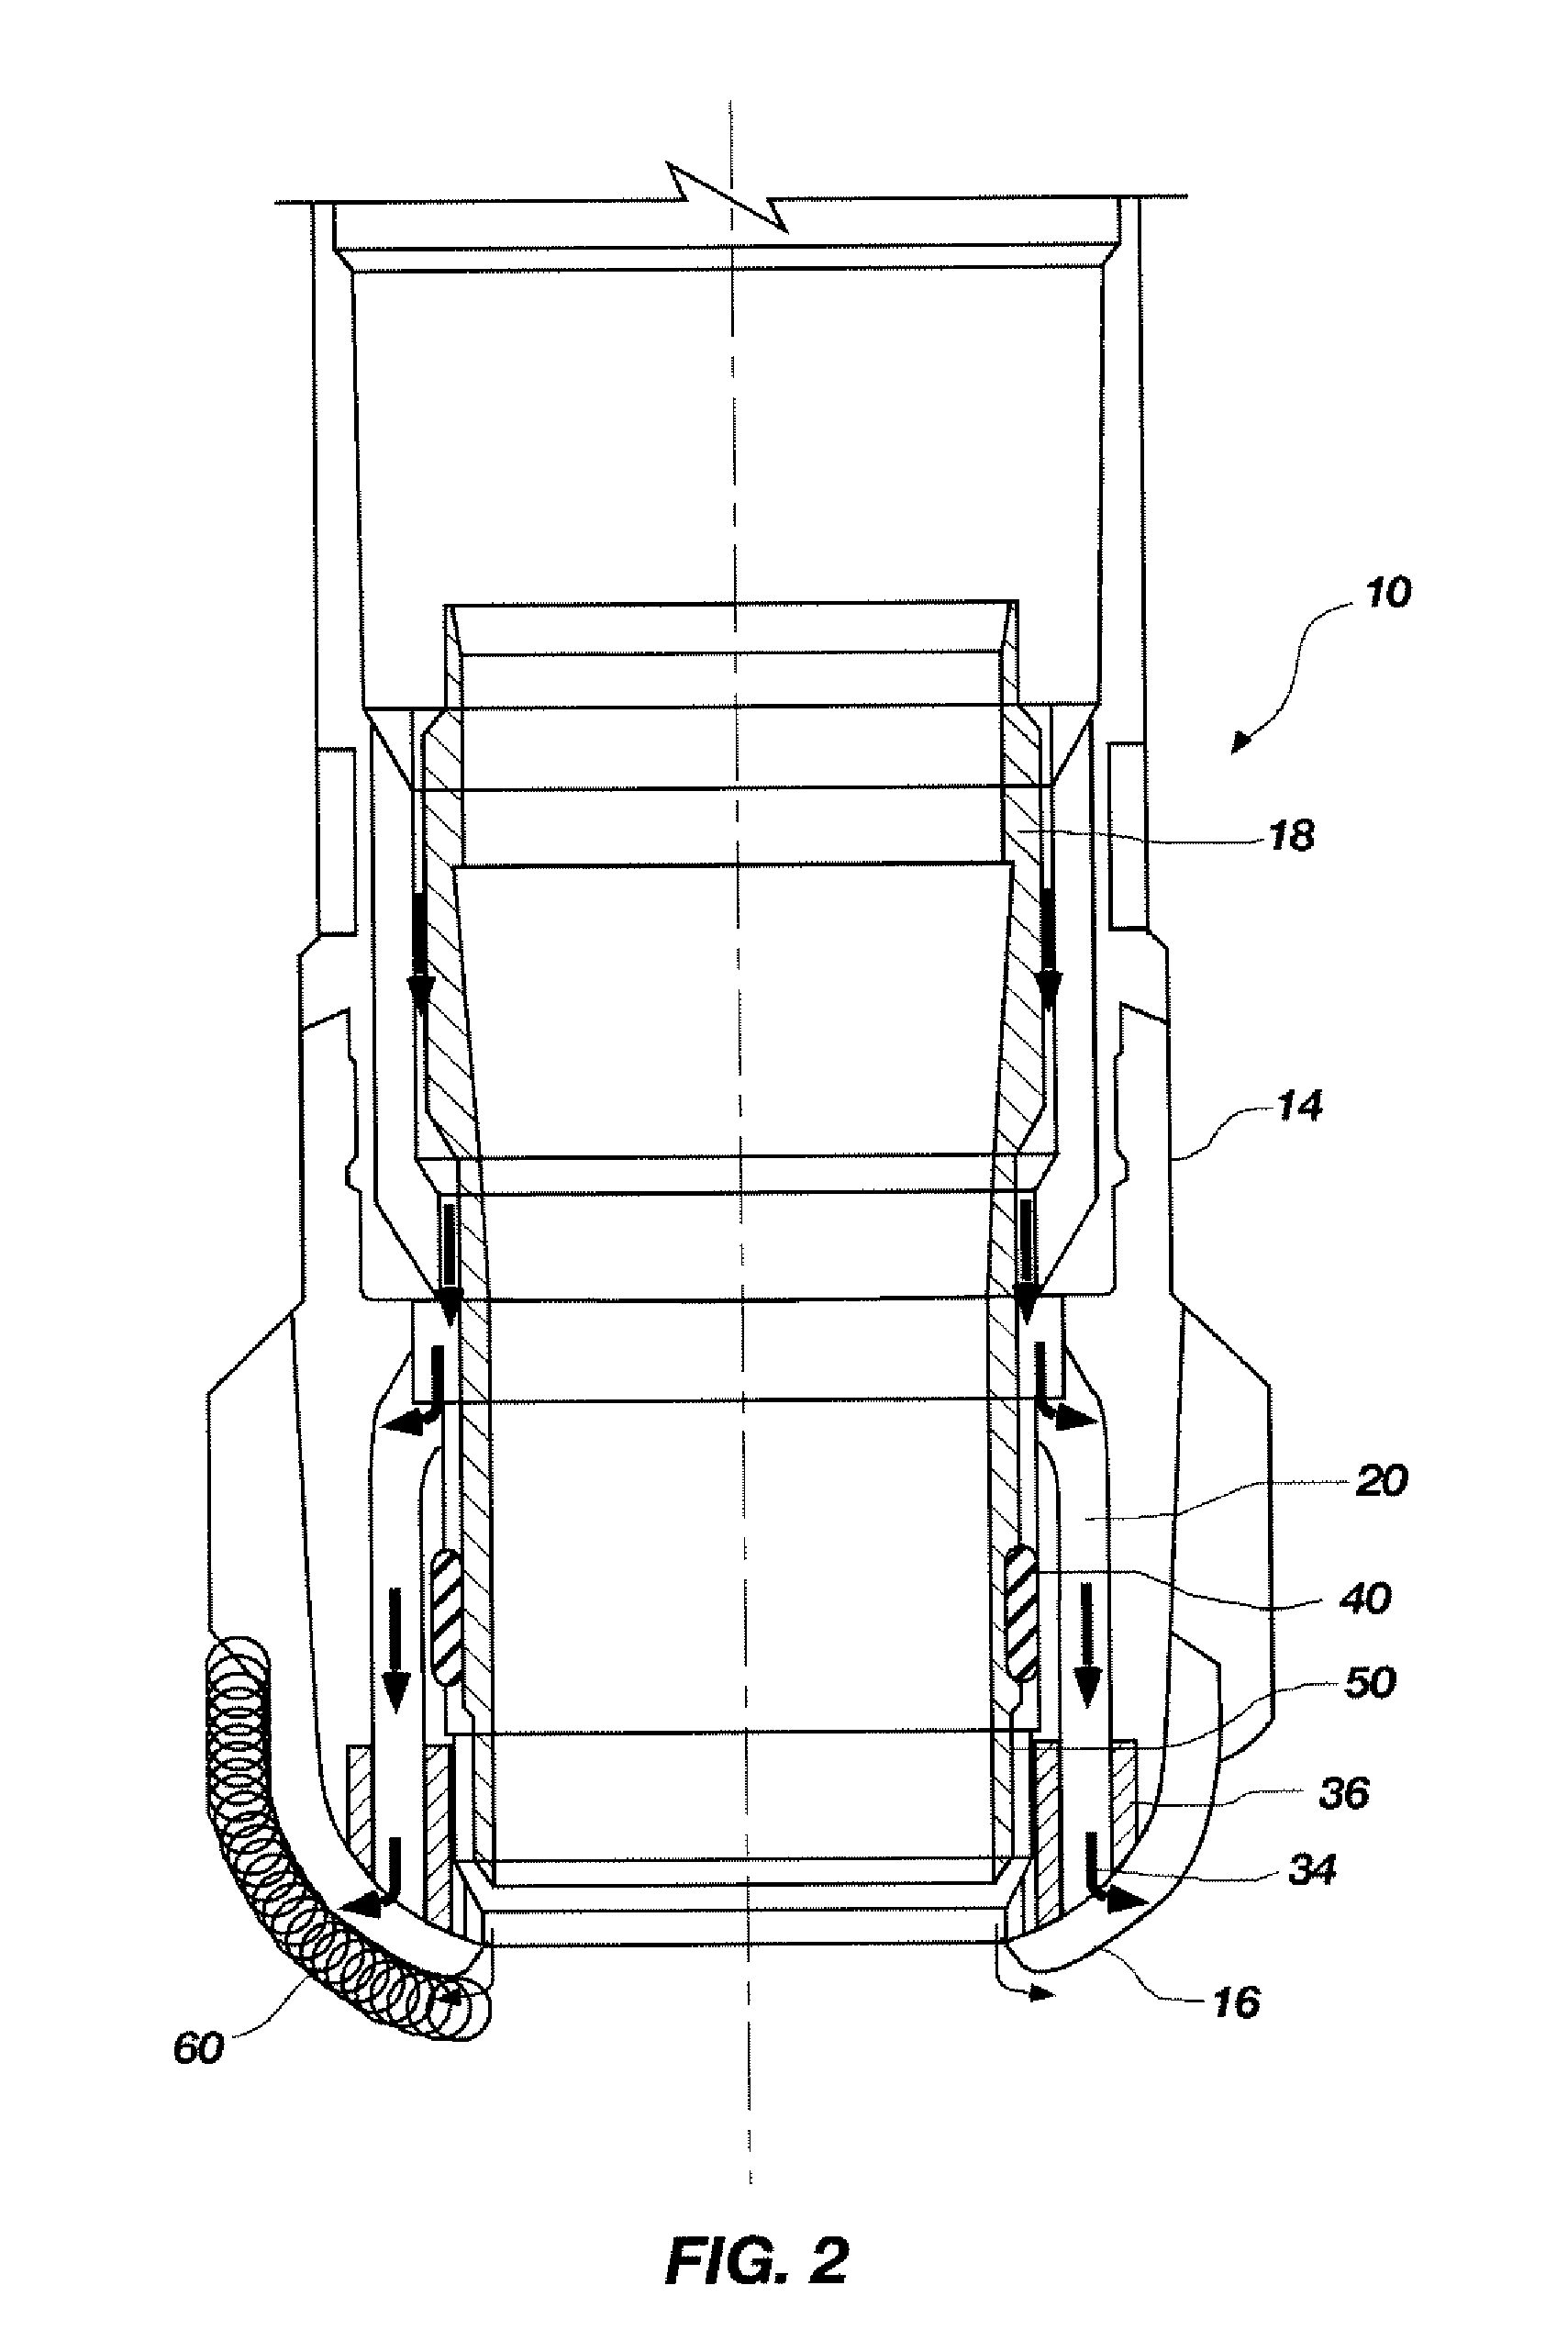 Core drill assembly with adjustable total flow area and restricted flow between outer and inner barrel assemblies